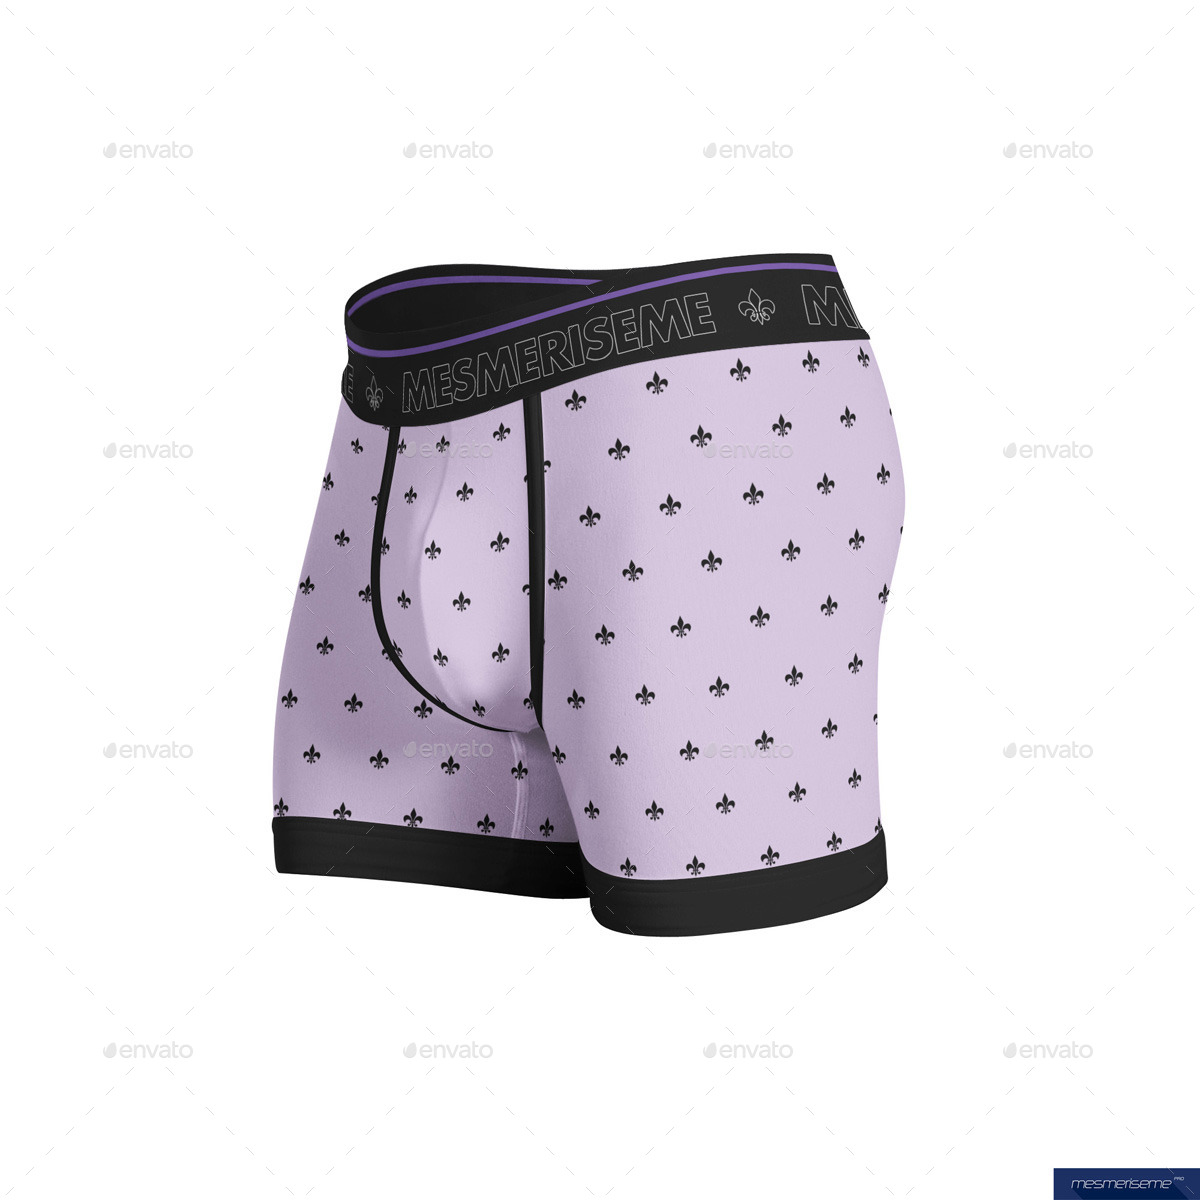 Download Trunks And Boxer Briefs Boxers Mock Up By Mesmeriseme Pro Graphicriver